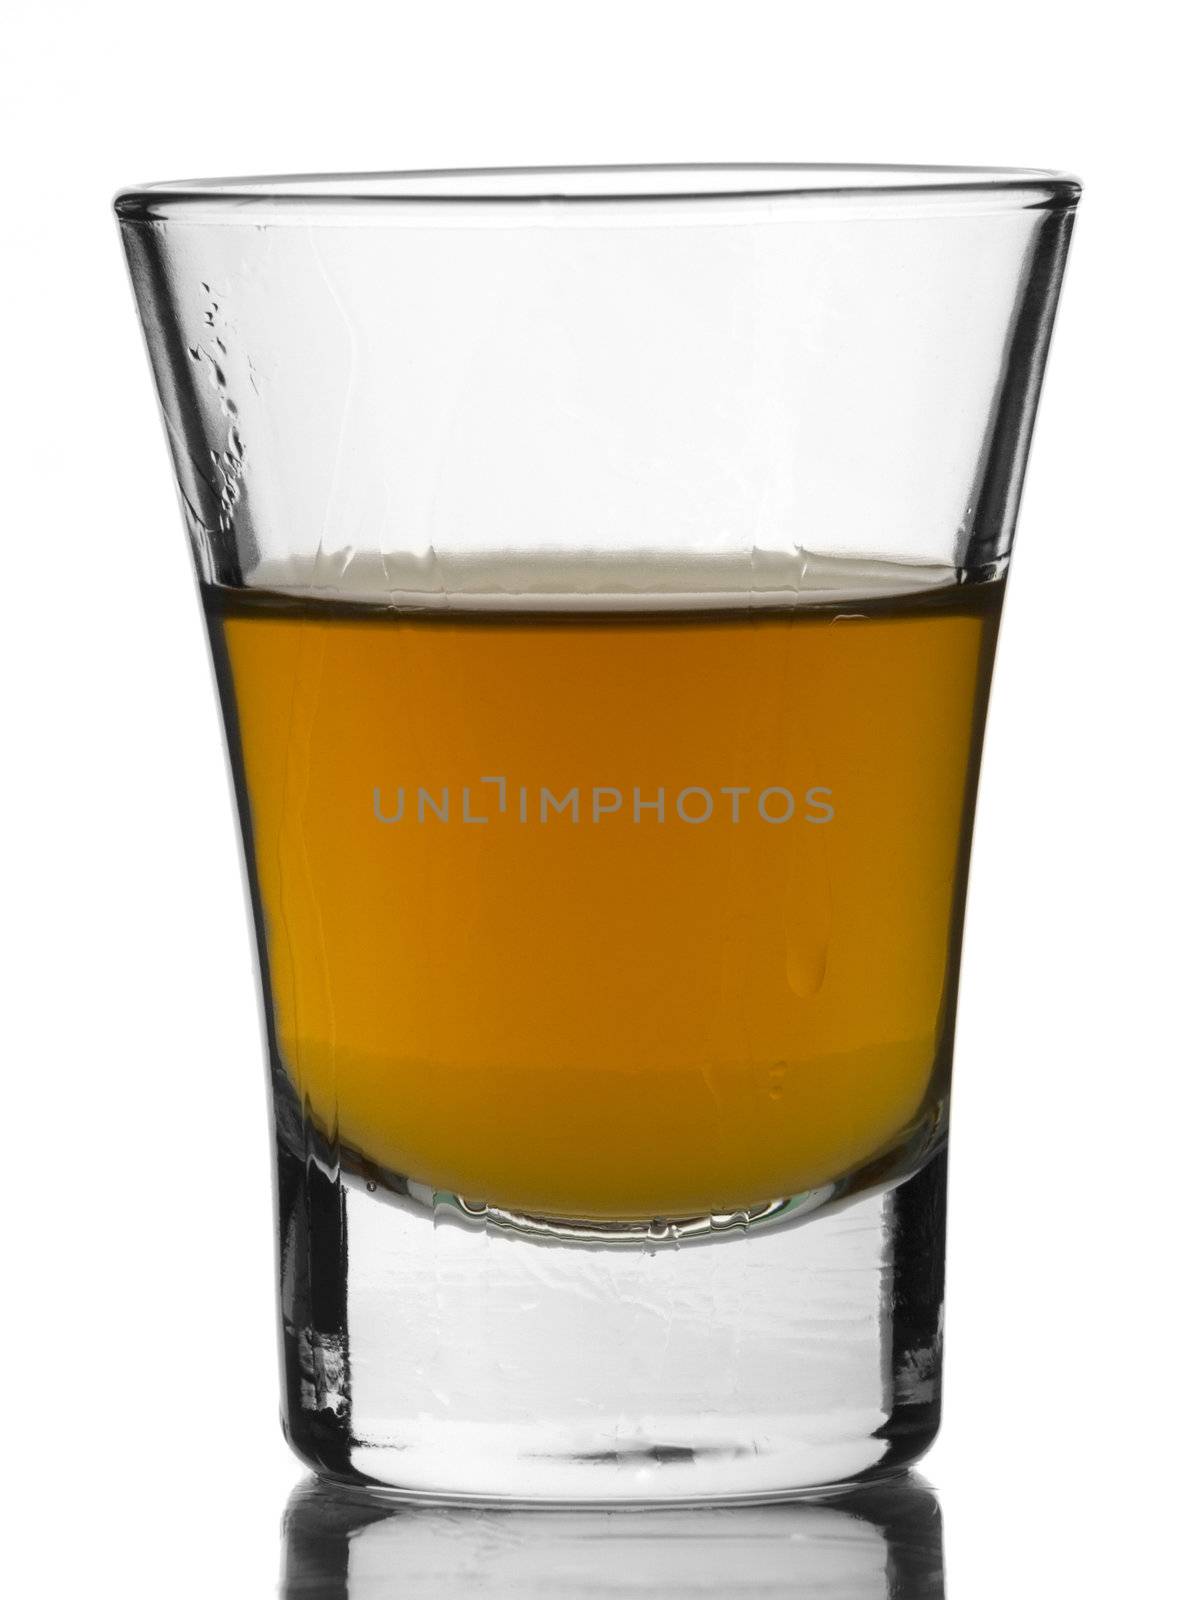 A shot of whisky on white background.